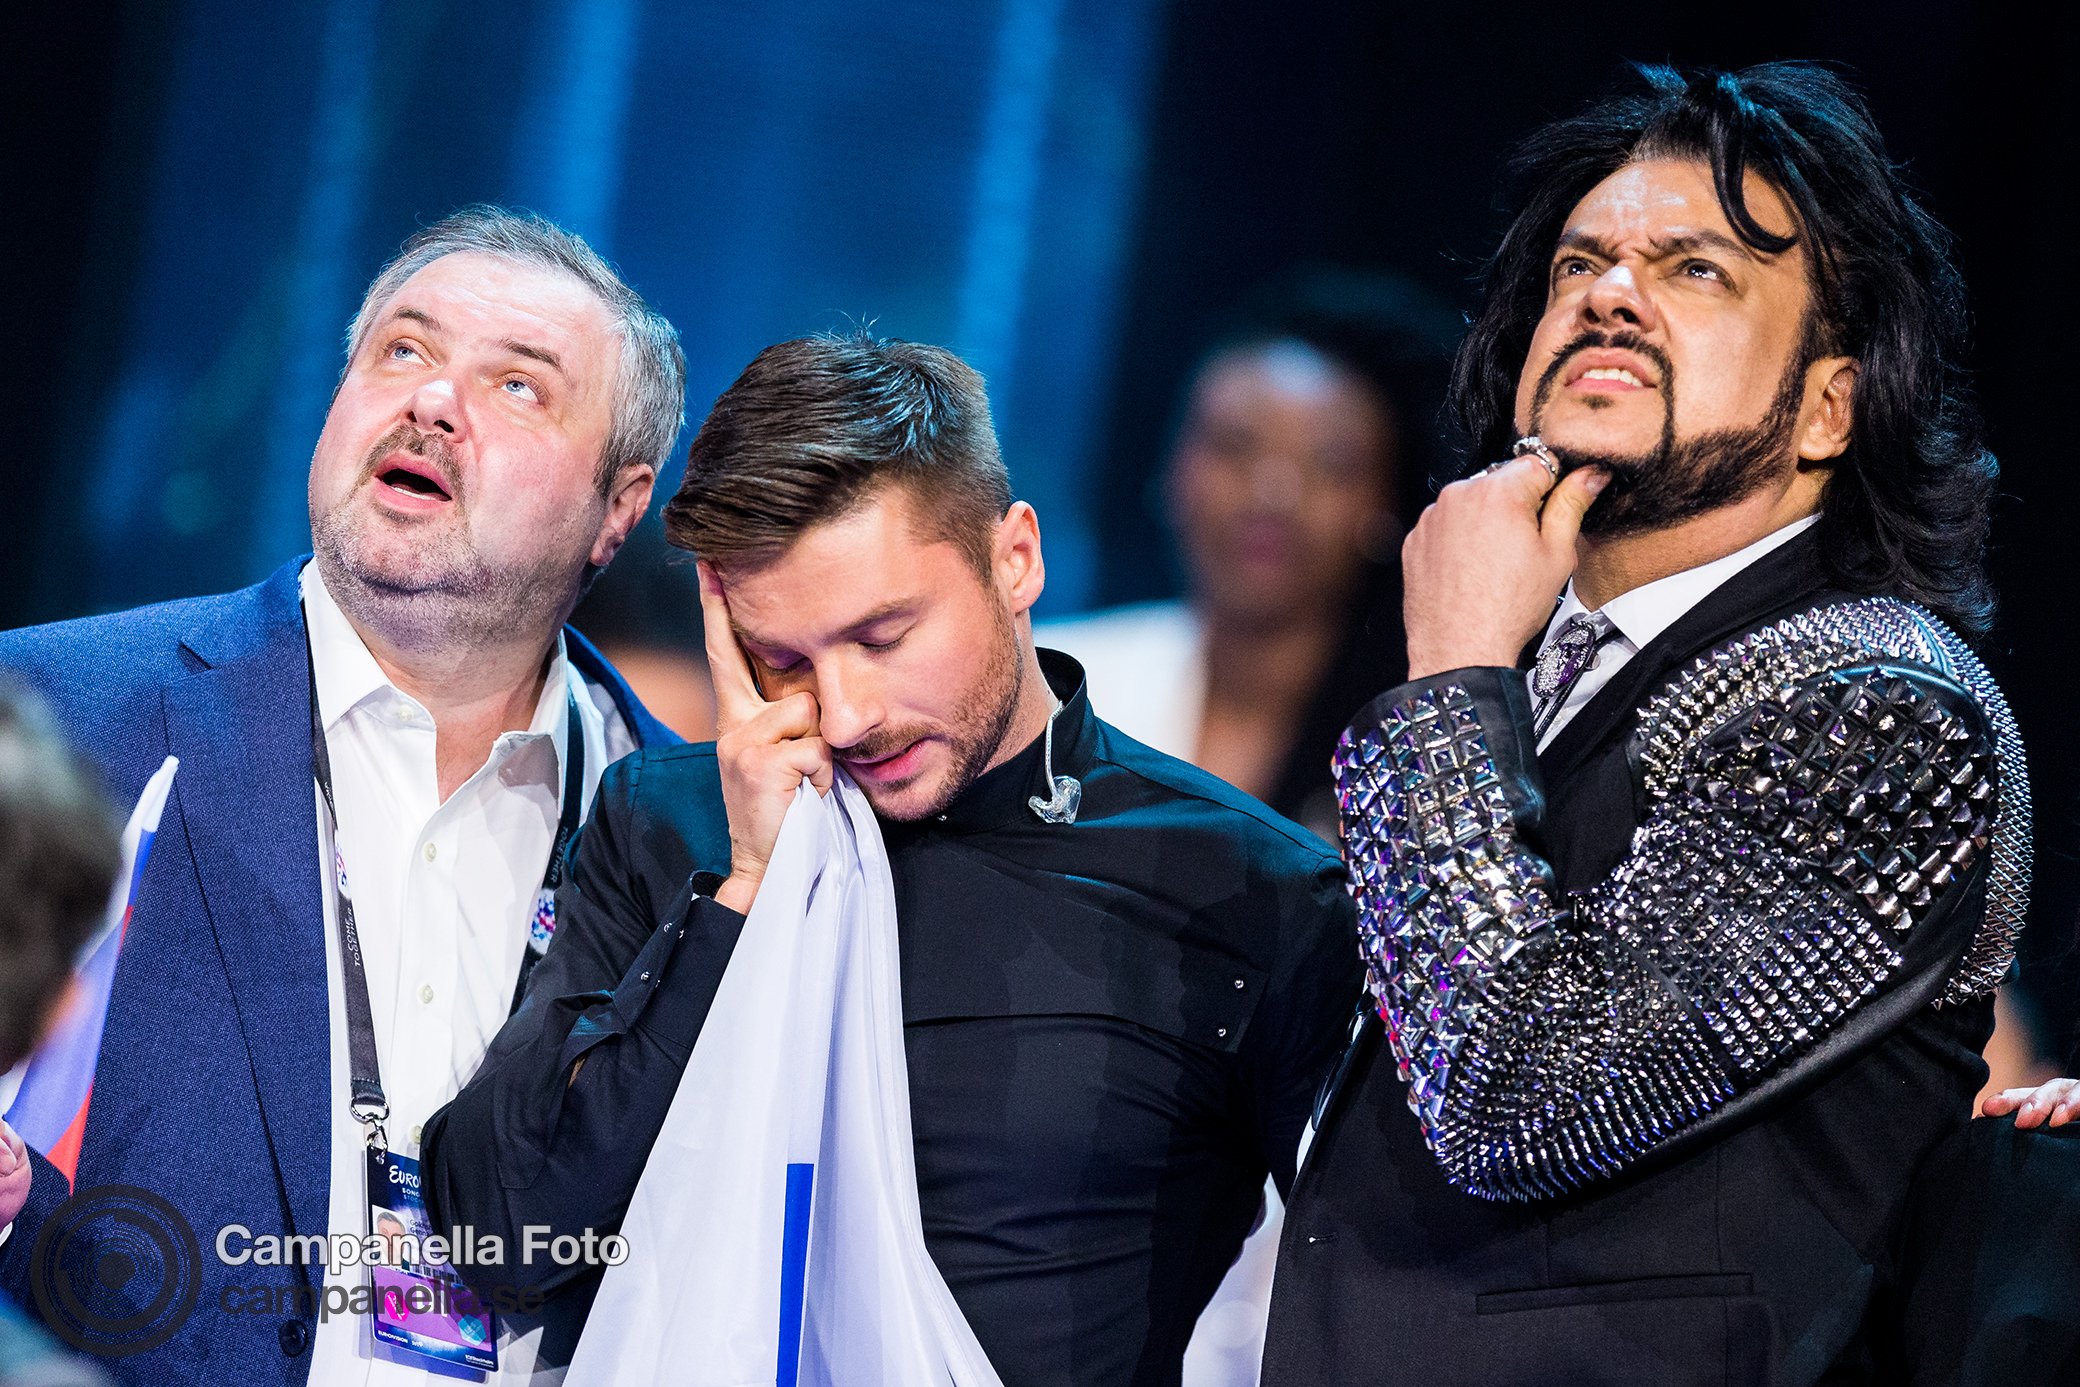 The 2016 Eurovision Song Contest - Michael Campanella Photography